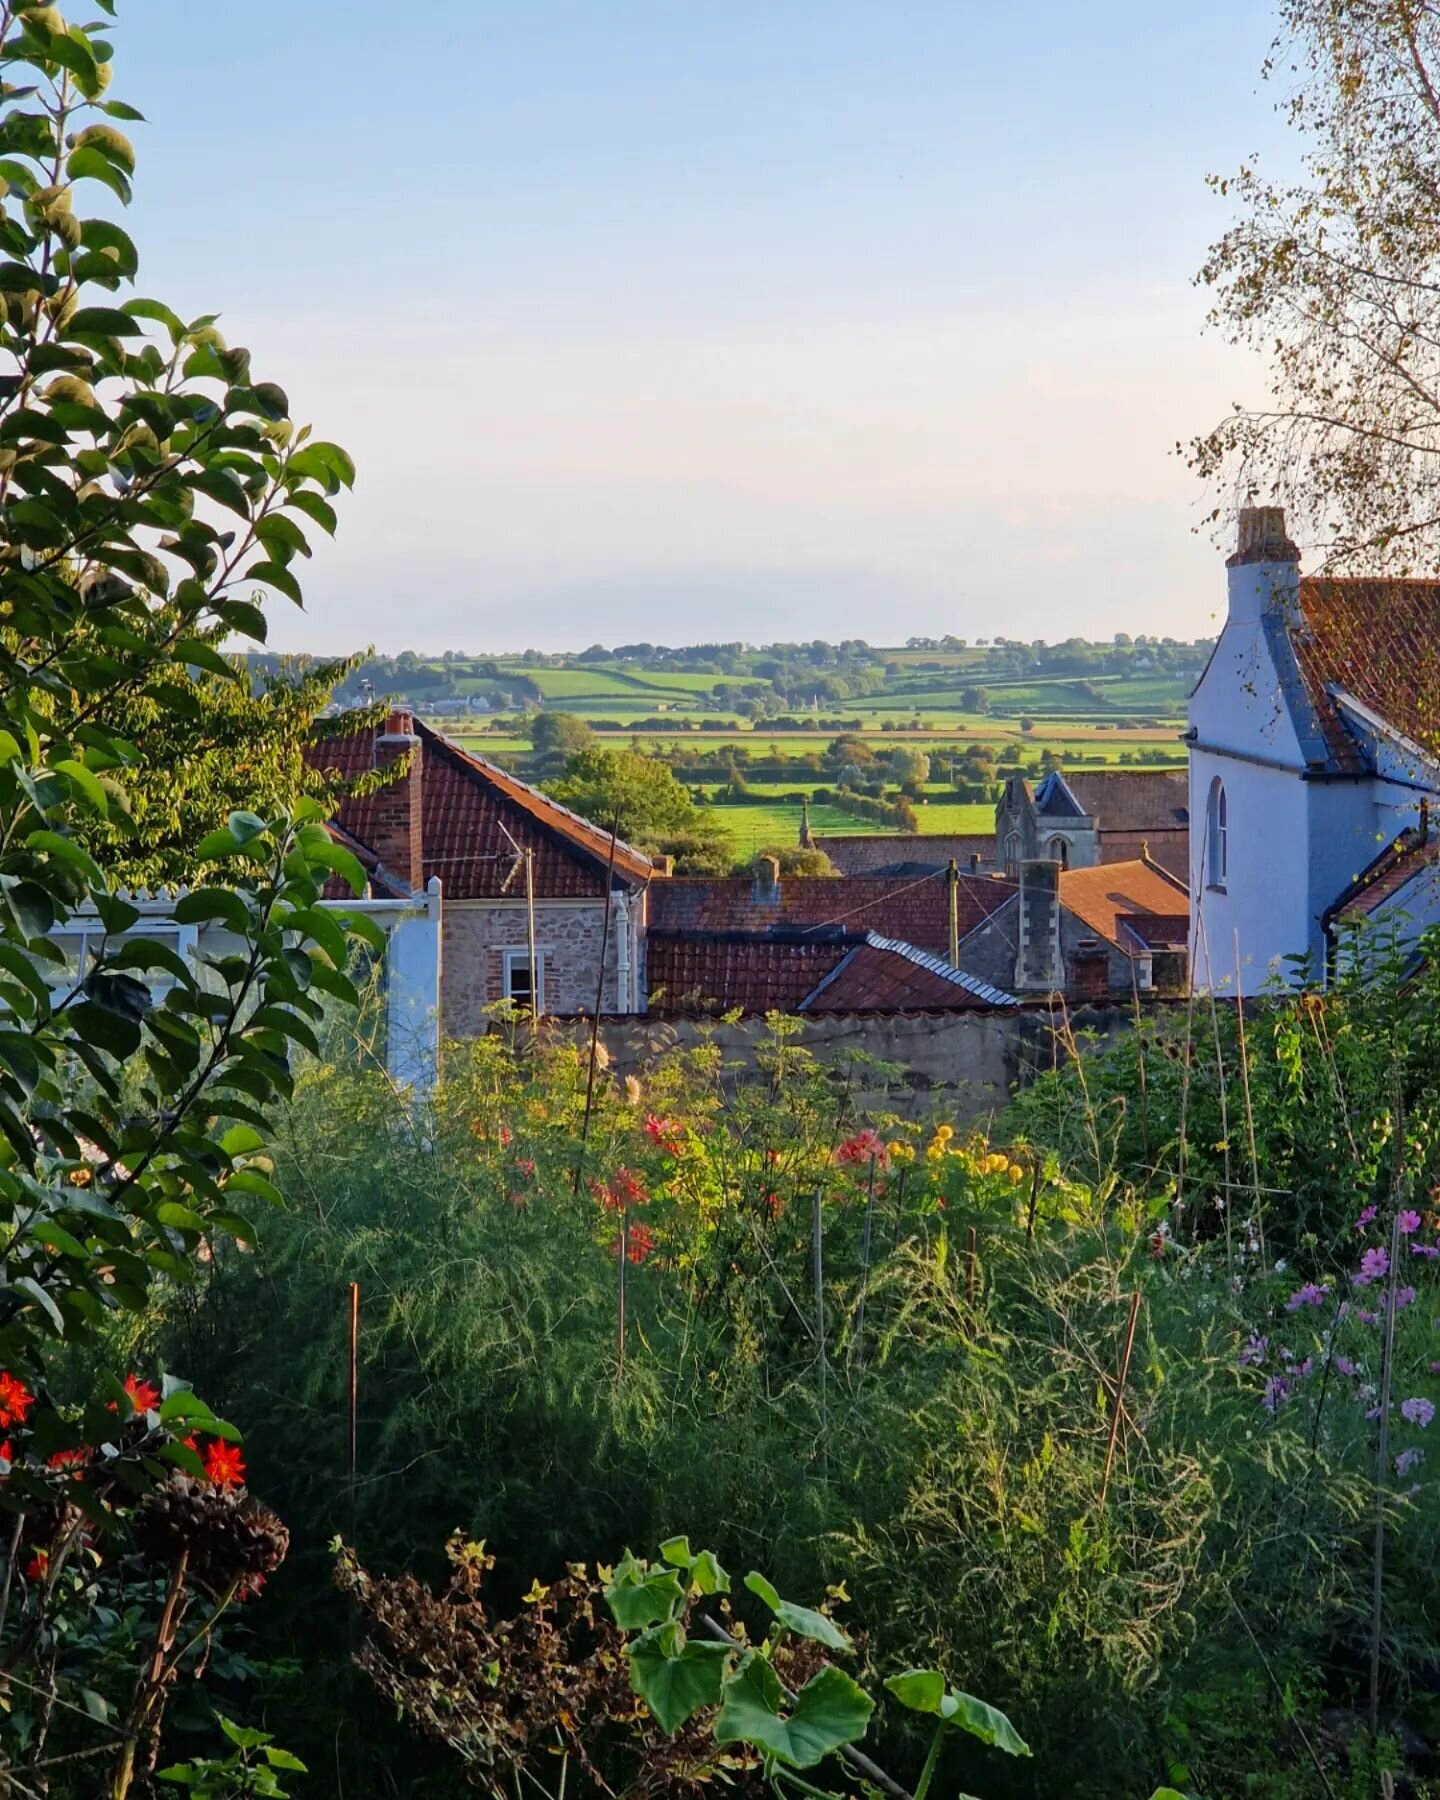 A couple of lovely views - golden hour from the top of the garden, looking over the house. And a look out of the windows up West Street towards the sunset. When the sun comes out, you could almost think you were in the south of France....
.
.
.
#holi